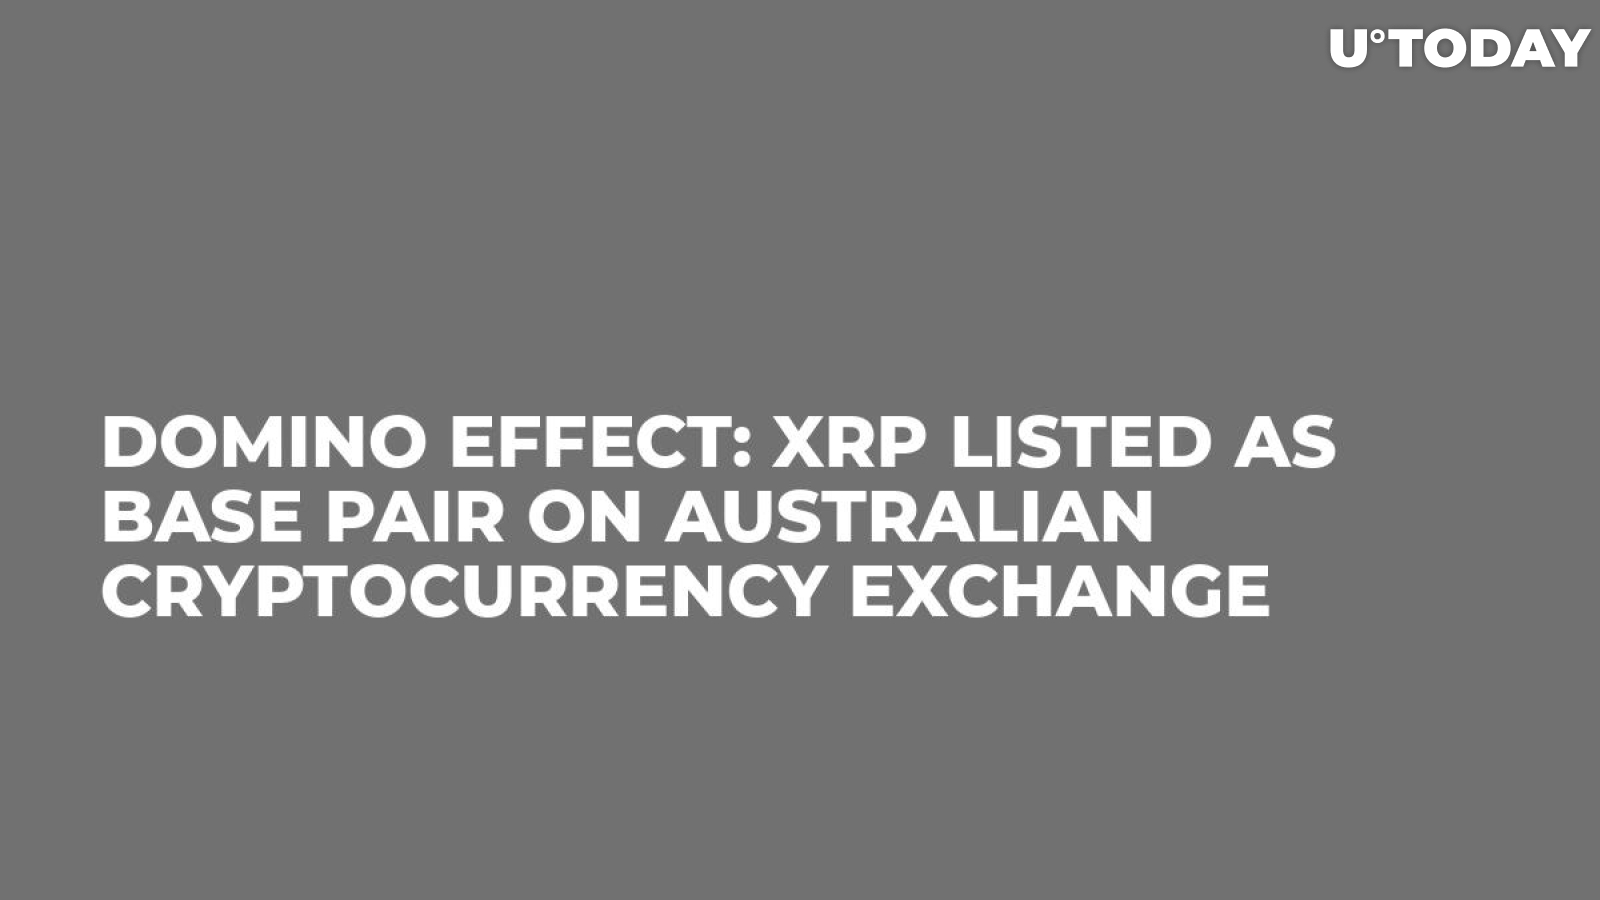 Domino Effect: XRP Listed as Base Pair on Australian Cryptocurrency Exchange